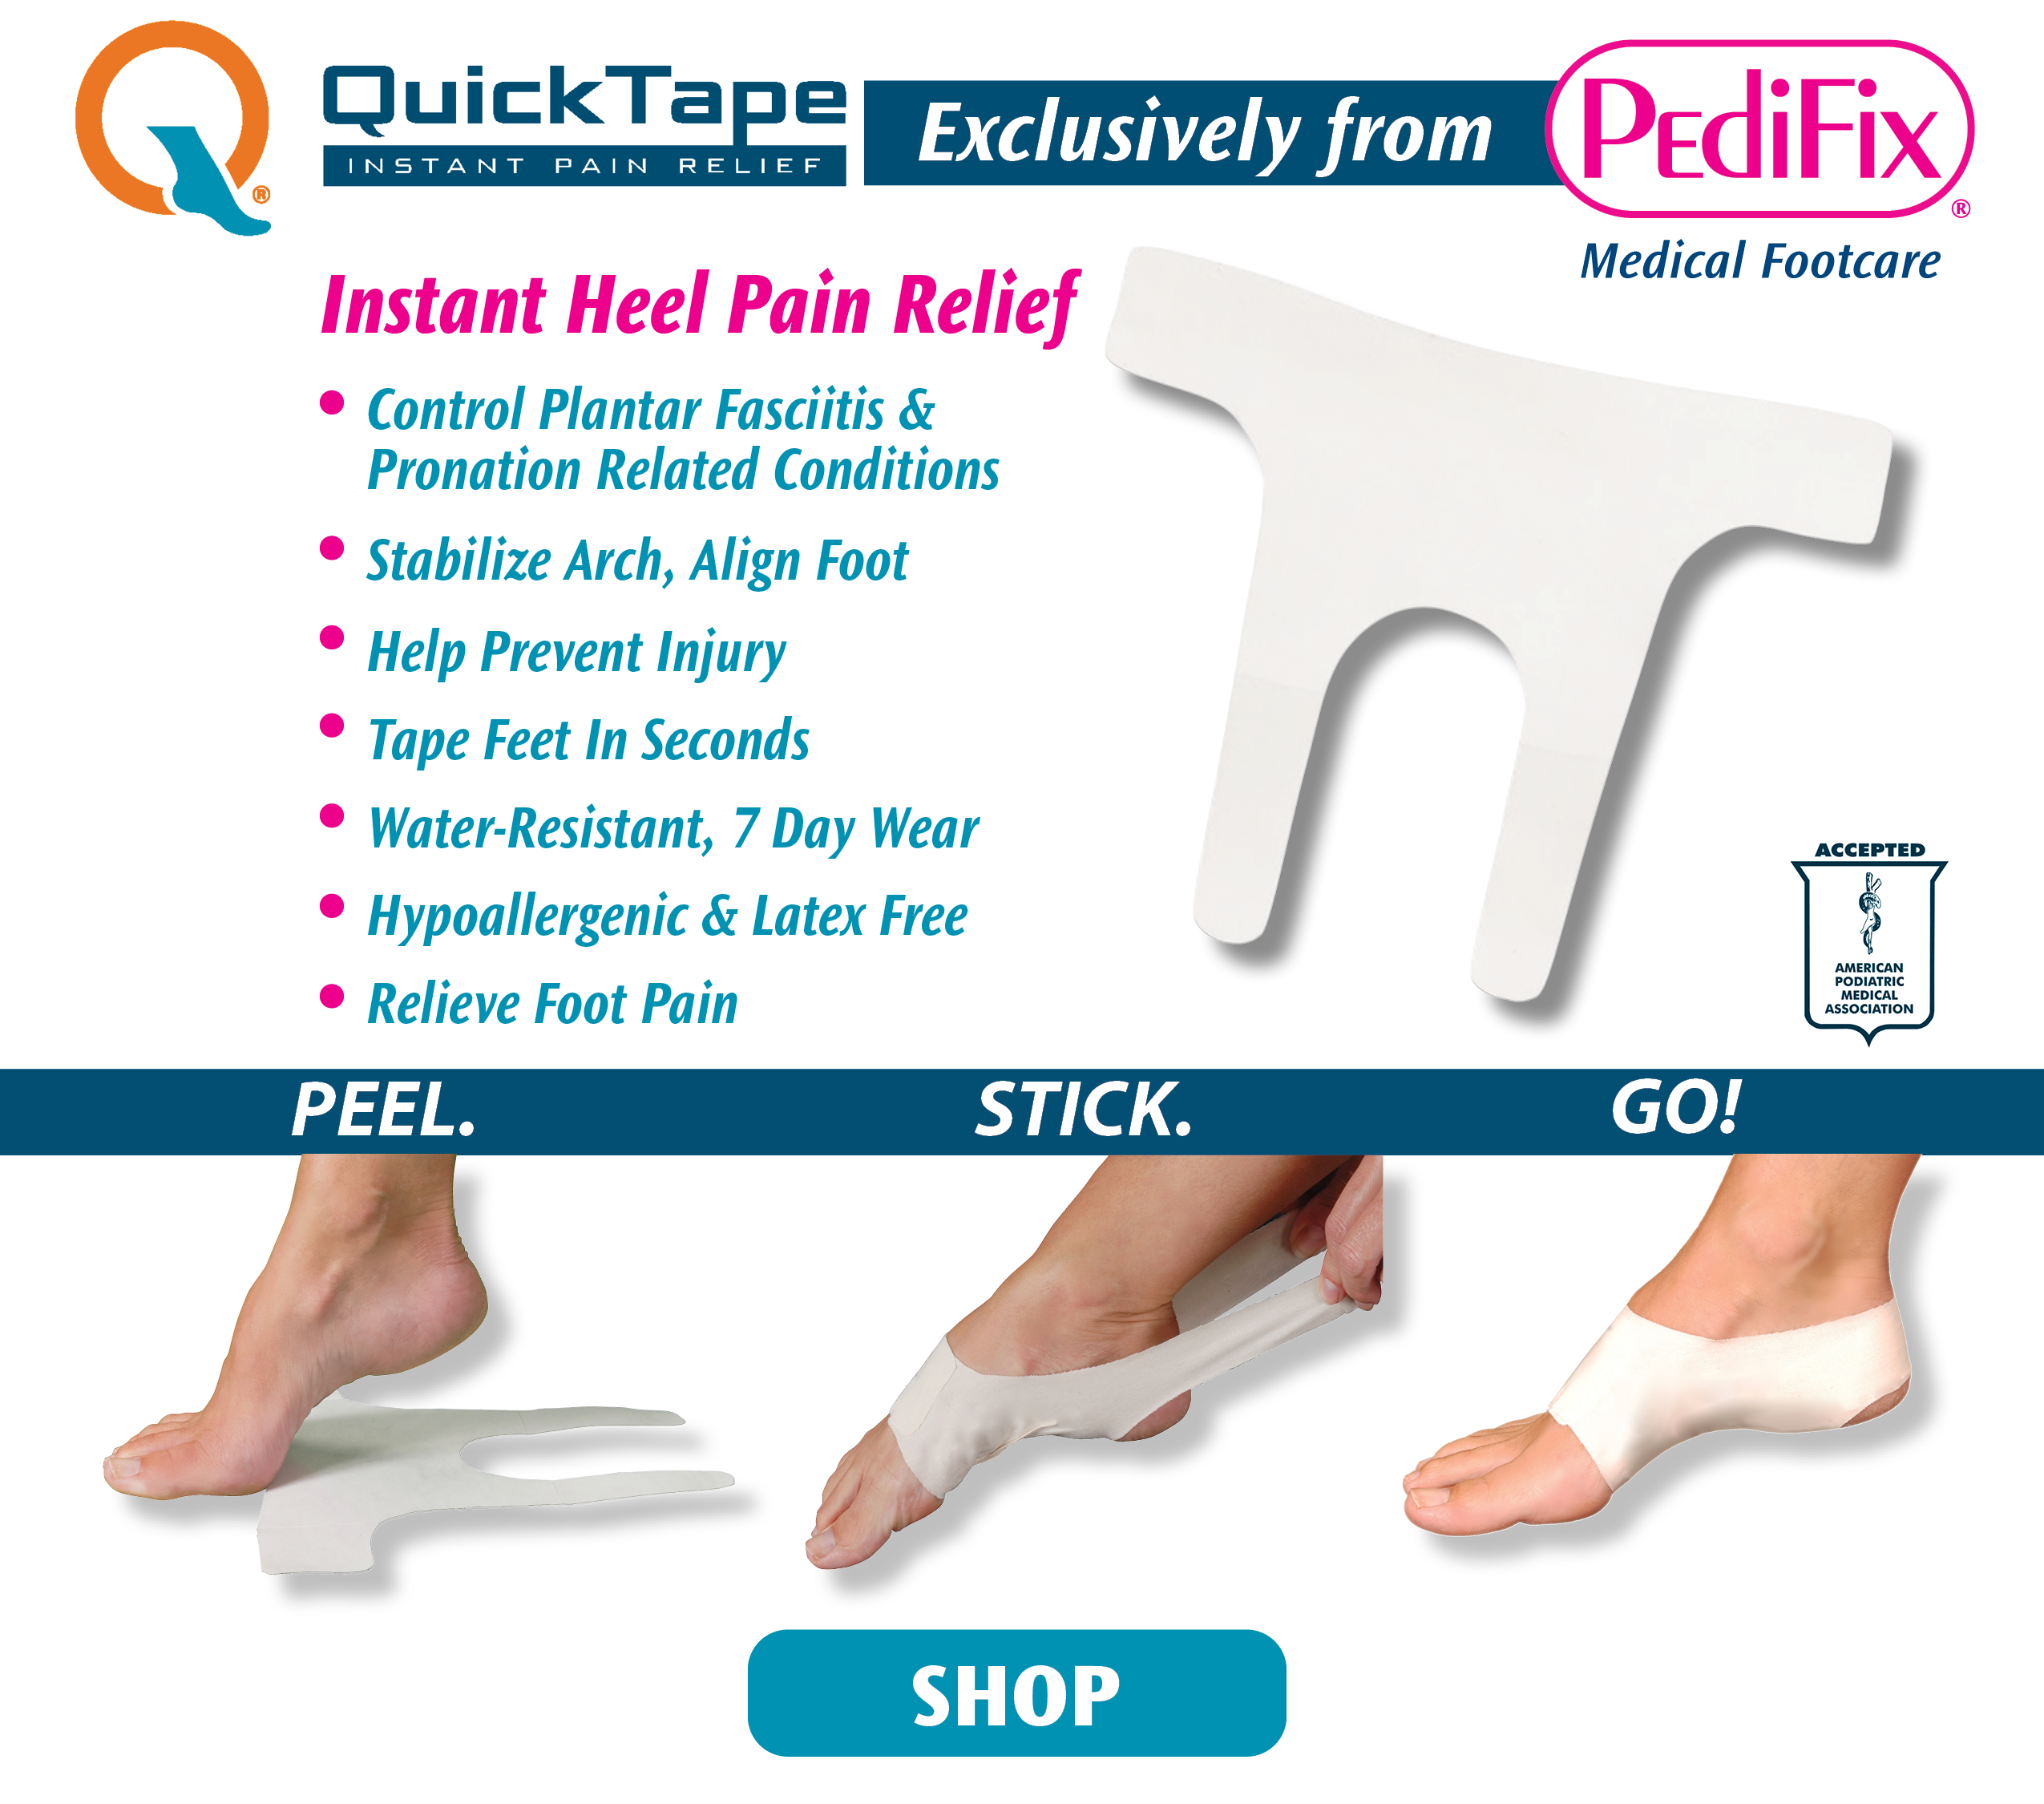 Foot care: support for foot problems and foot pain relief